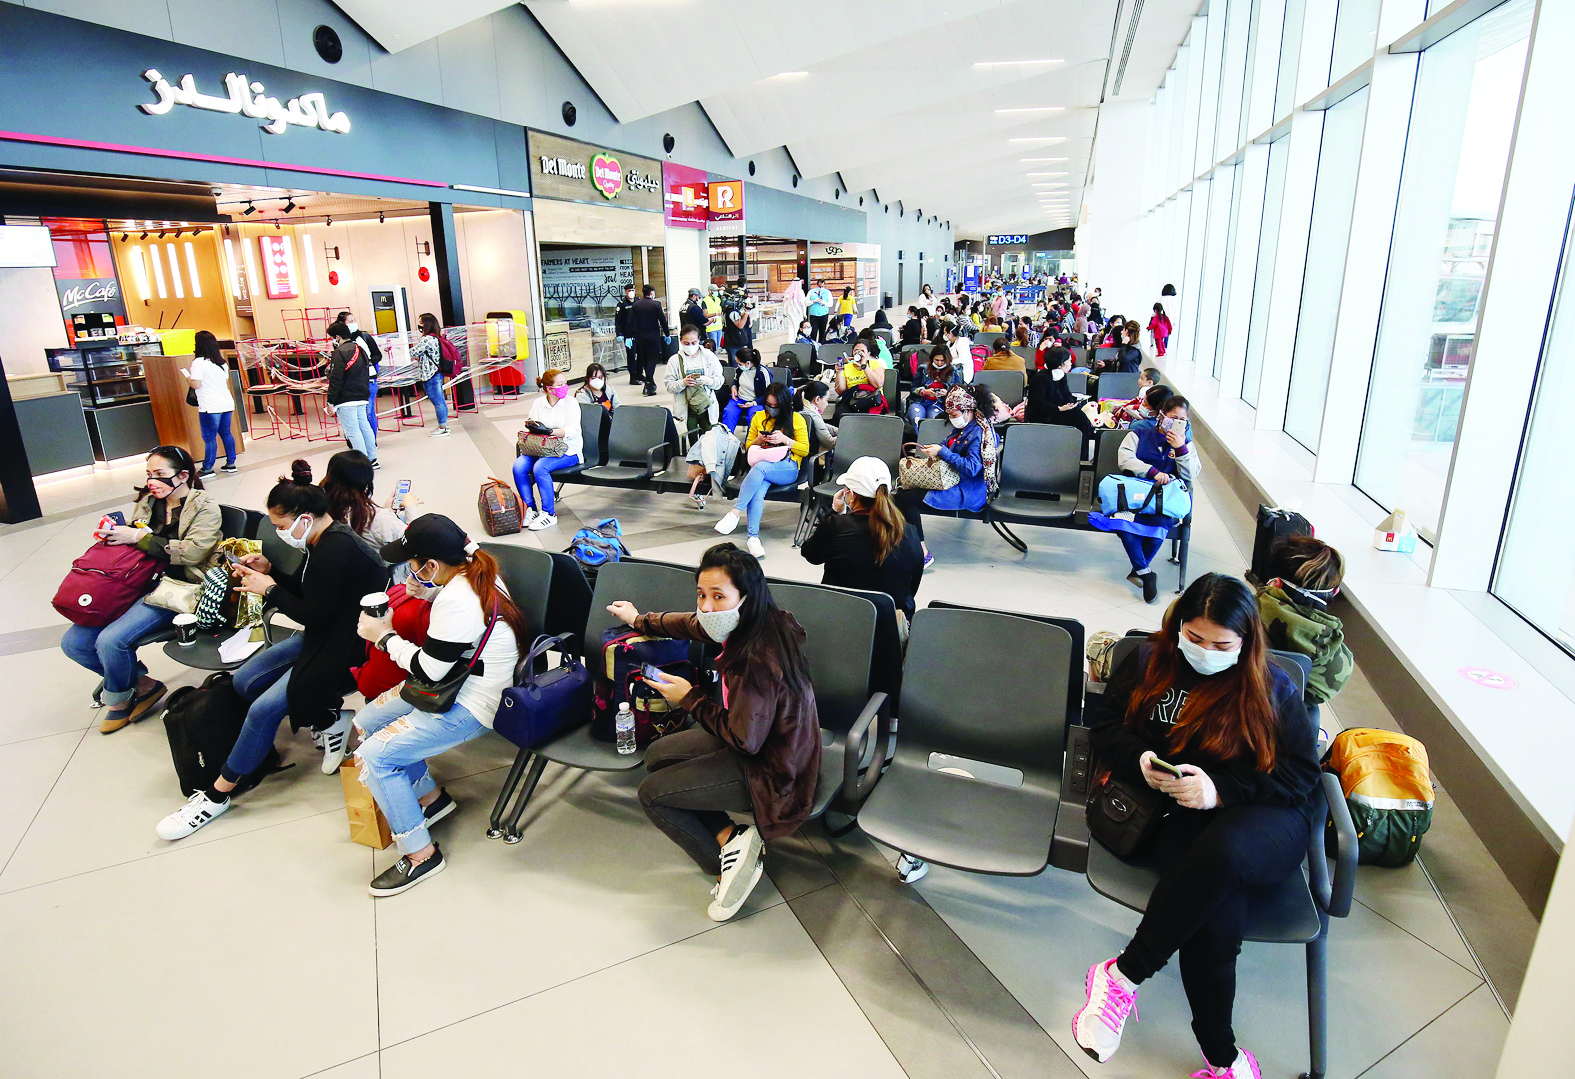 Filipinos who availed general amnesty granted by the Kuwaiti government are pictured gathering at the Kuwait International Airport Terminal 4, on April 3, 2020 on their home to Manila amid the coronavirus COVID-19 pandemic crisis. - For systematic documentations, illegal expats from the Philippines, Egypt, India, Bangladesh, Sri Lanka and other countries  were at first, requested to submit themselves at a school compound in Farwaniya arranged according to nationalities. (Photo by YASSER AL-ZAYYAT / AFP)